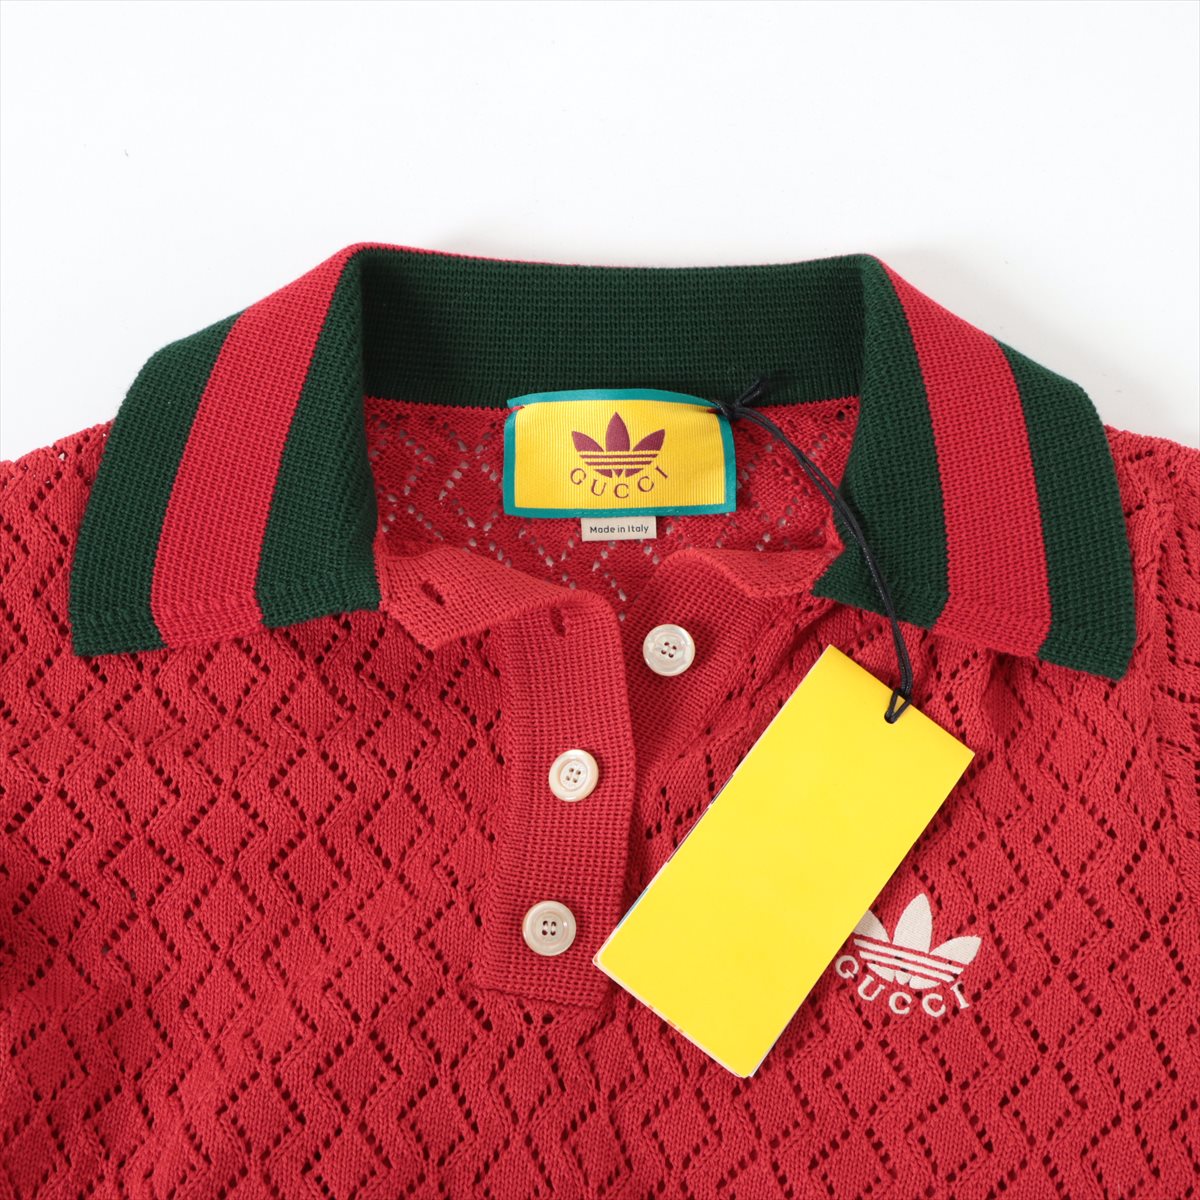 Gucci x adidas Cotton Short Sleeve Knitwear XS Ladies' Red  693832 With inner